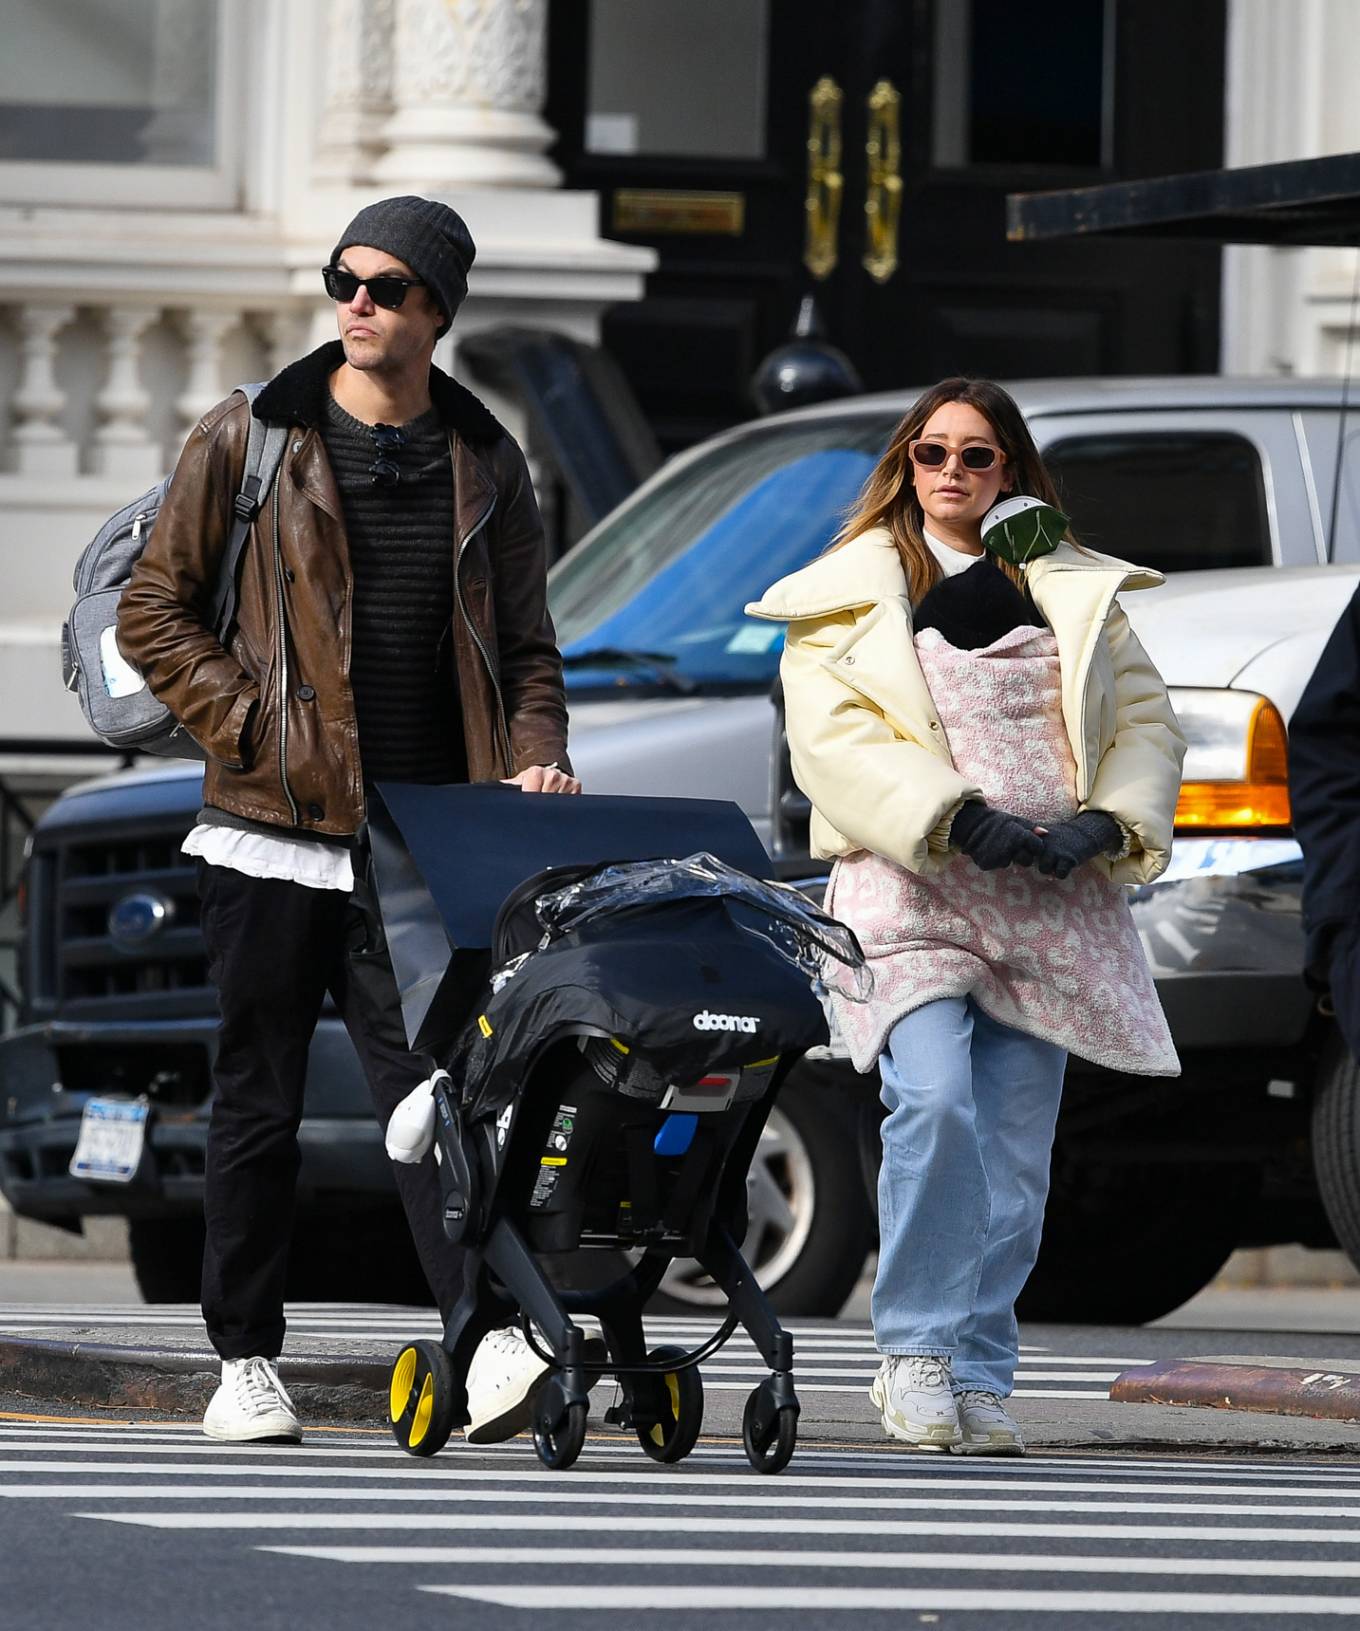 Ashley Tisdale 2021 : Ashley Tisdale – With Christopher French on a family stroll in New York City-05